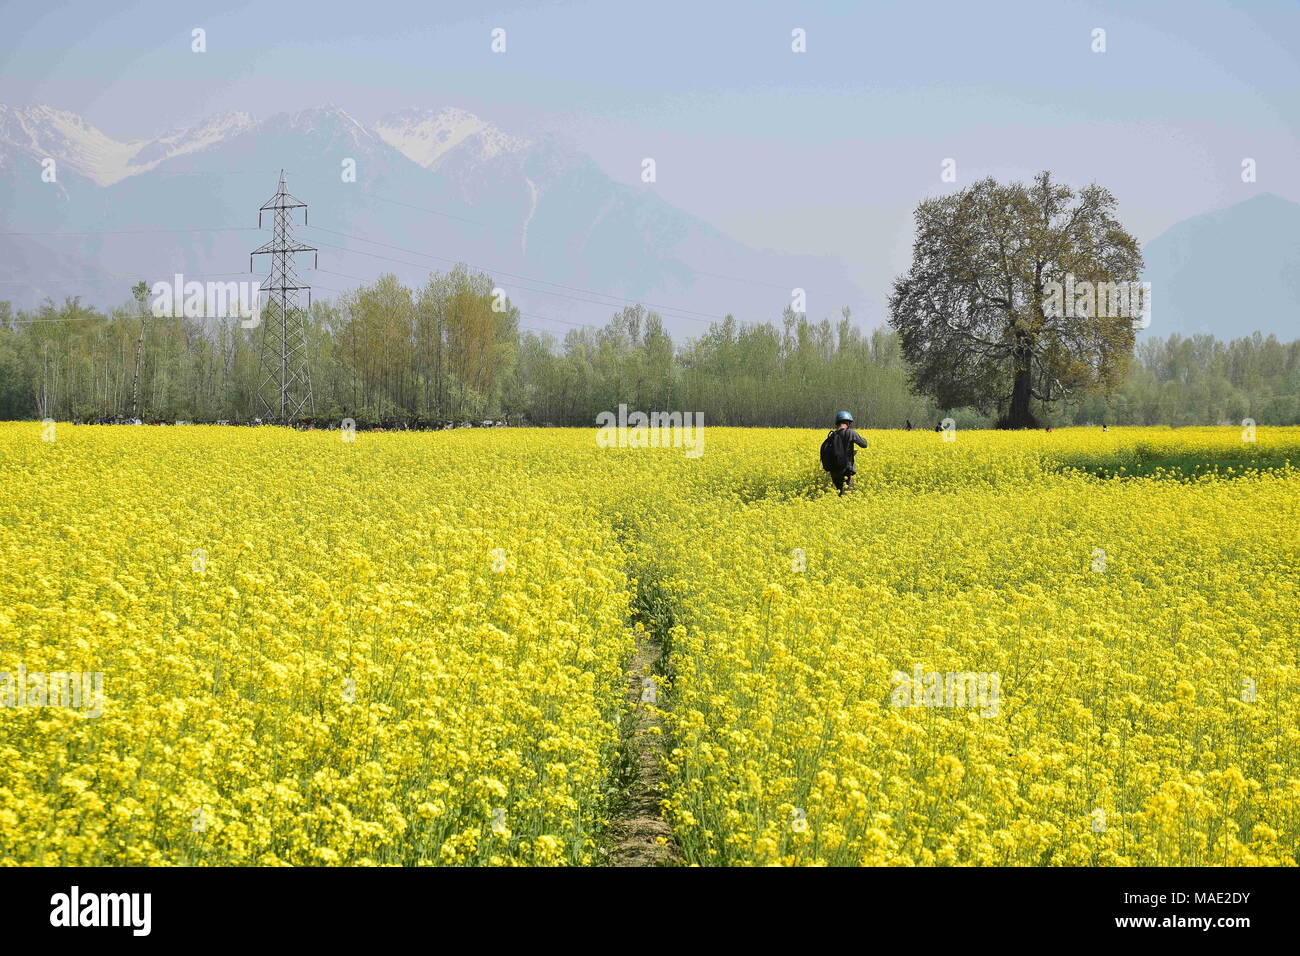 Kashmir, India, 31 Mar 2018. Kashmiri Men walks through the bloomed mustard field in the outskirts of Srinagar.On the start of spring, the bloomed mustard fields strengths the sight of improvement across Kashmir Valley, which ending of deadly winter fascinates tourists with the golden fields of mustard. The Mustard Crop is sown in September-October, which is blossomed as there is increase in temperature after winter and the farm is harvested in the end of May month. Mustard has a high oil content for which researchers revealed that the oil of mustard can be used to prod Stock Photo